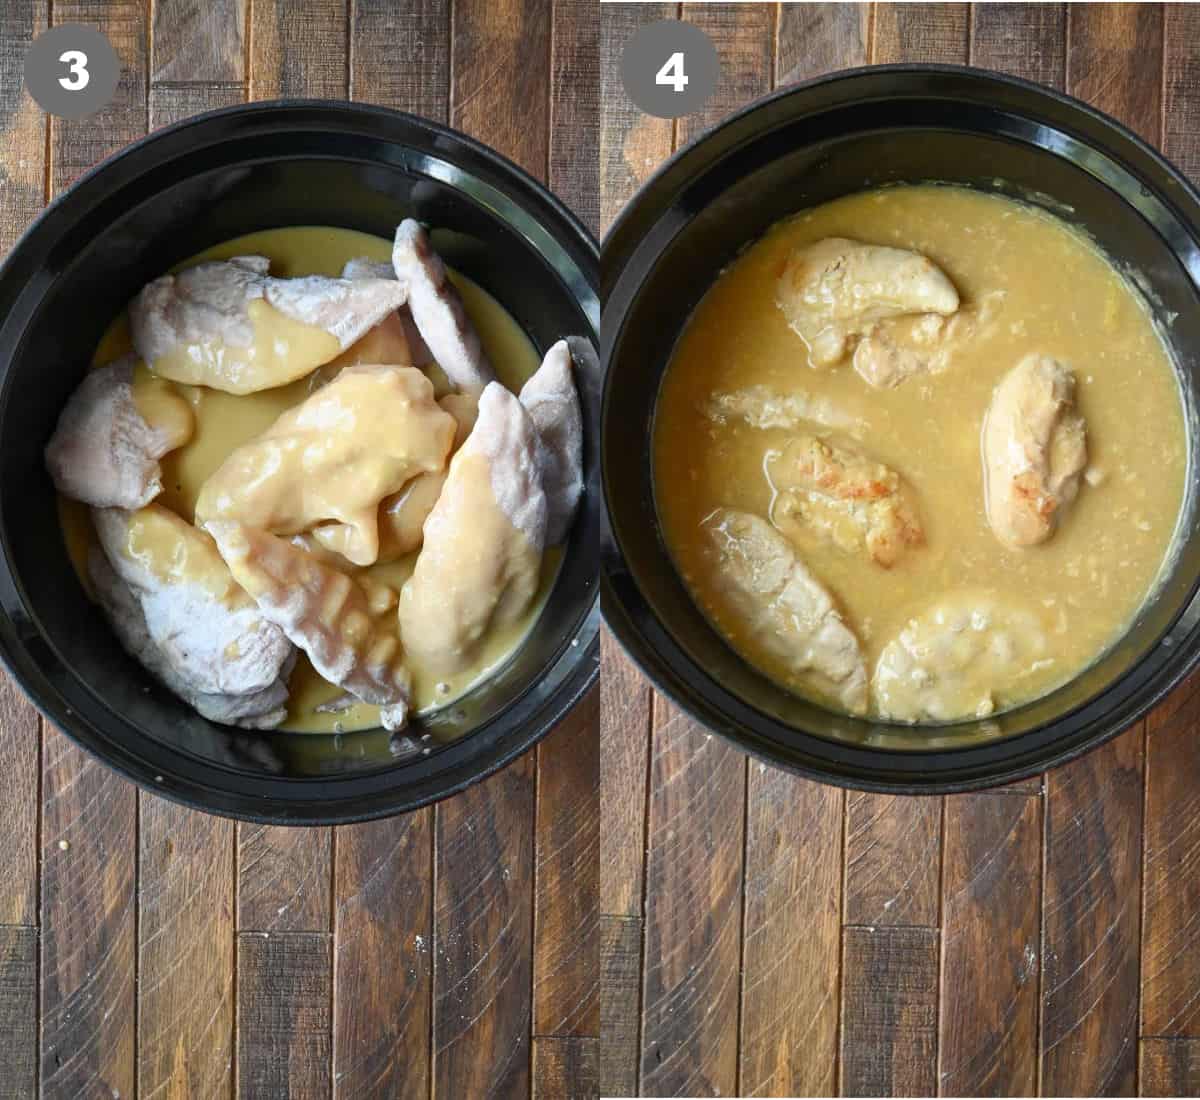 The gravy mixture poured on top of the chicken and cooked.